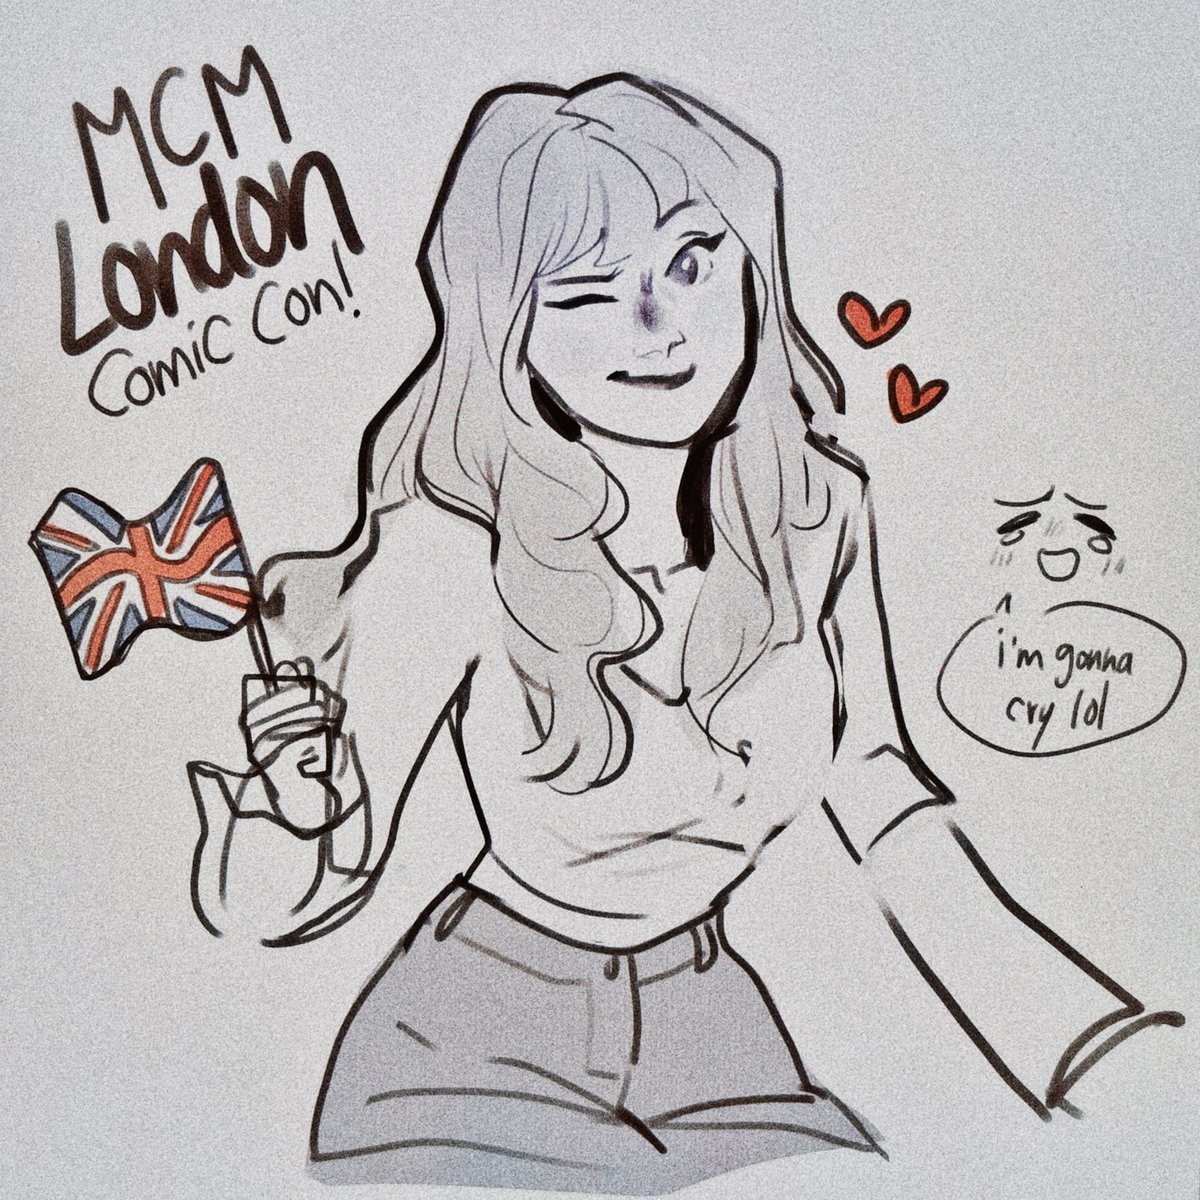 really excited to let you guys know i'll be at @MCMComicCon in London next week!! i'm gonna bring a bunch of to be announced exclusive new things and so much new art! i will be a mess and cry when i see you guys again though, fair warning 🤡 